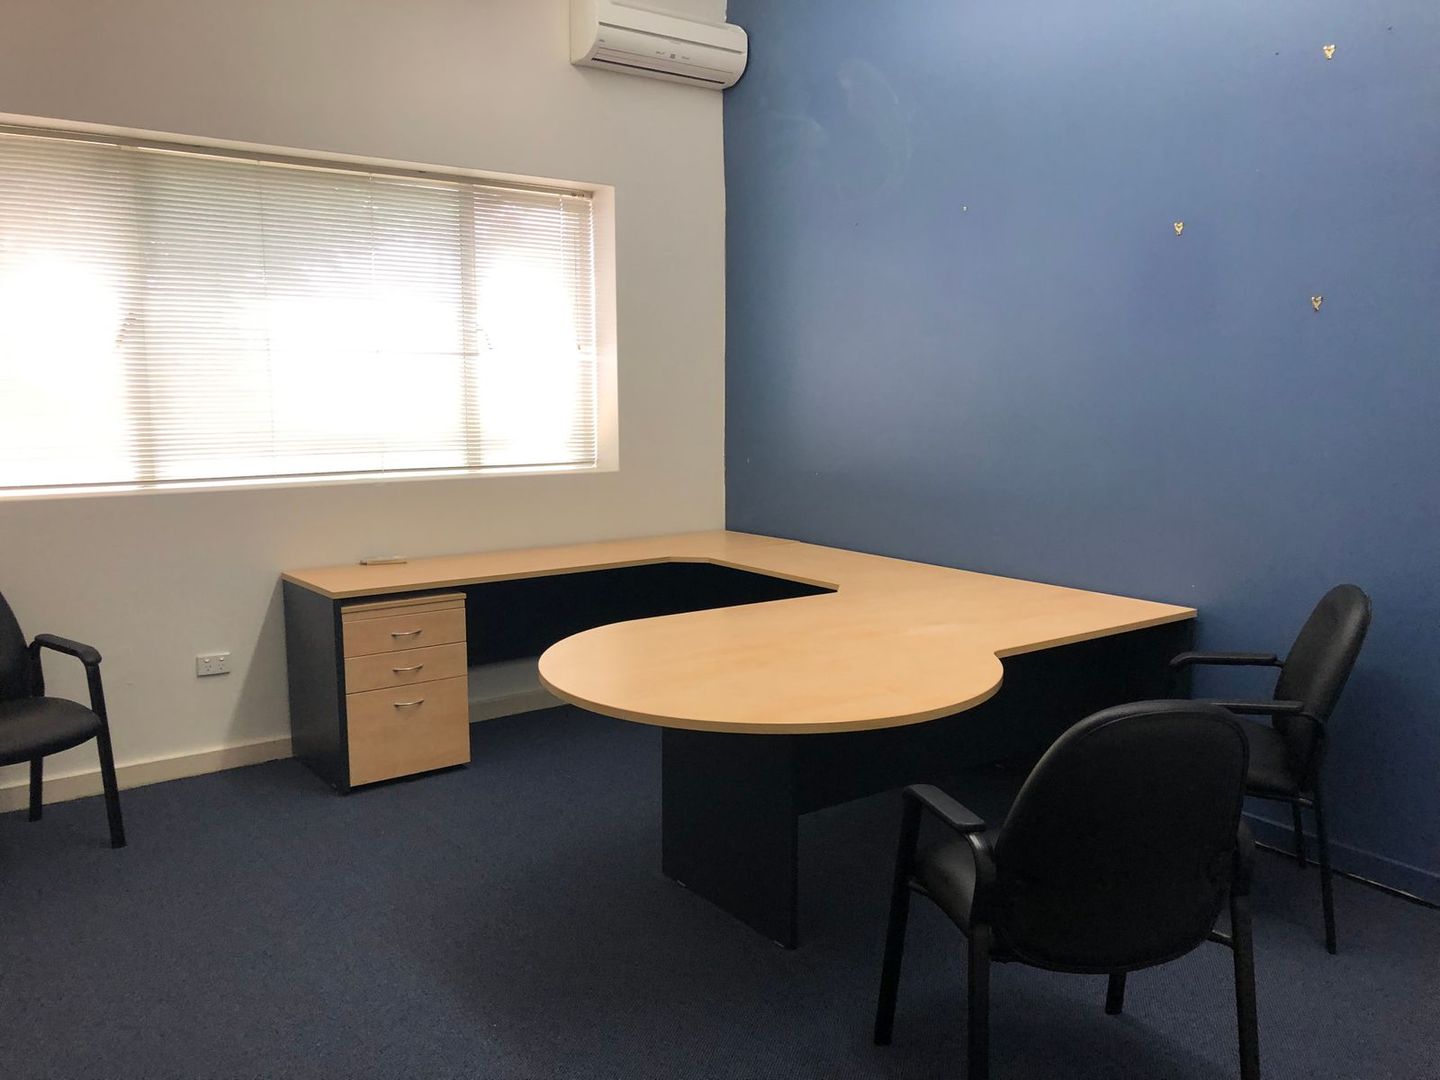 129-135 Otho Street- Commercial Office Space, Inverell NSW 2360, Image 2